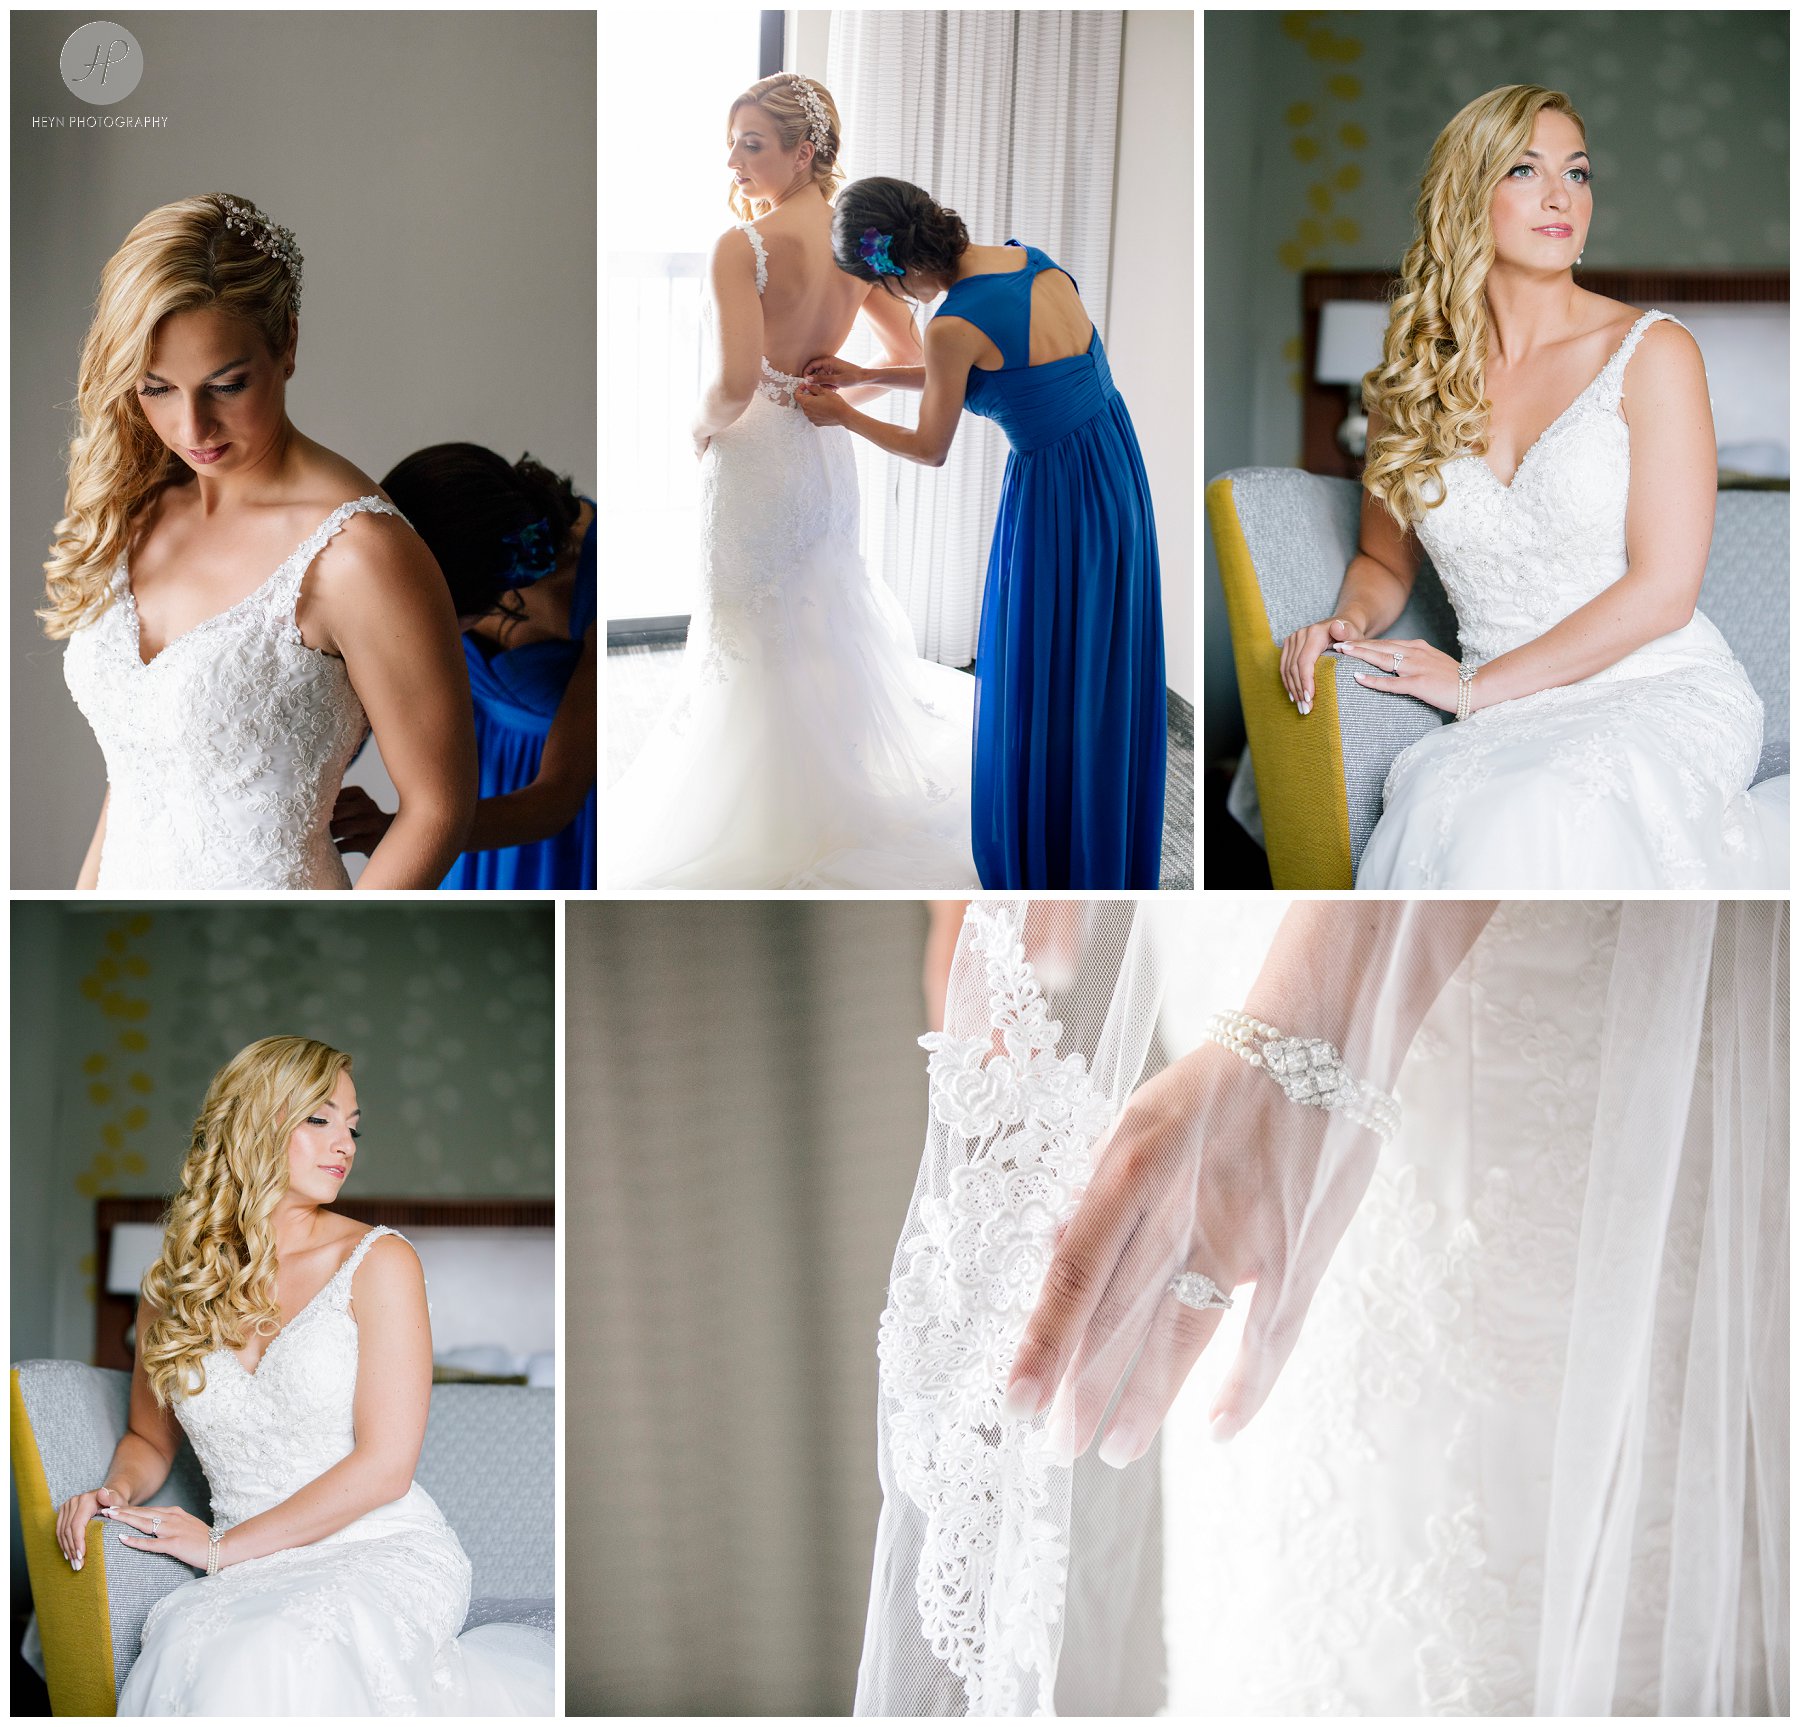 bride getting ready at clarks landing yacht club wedding in new jersey